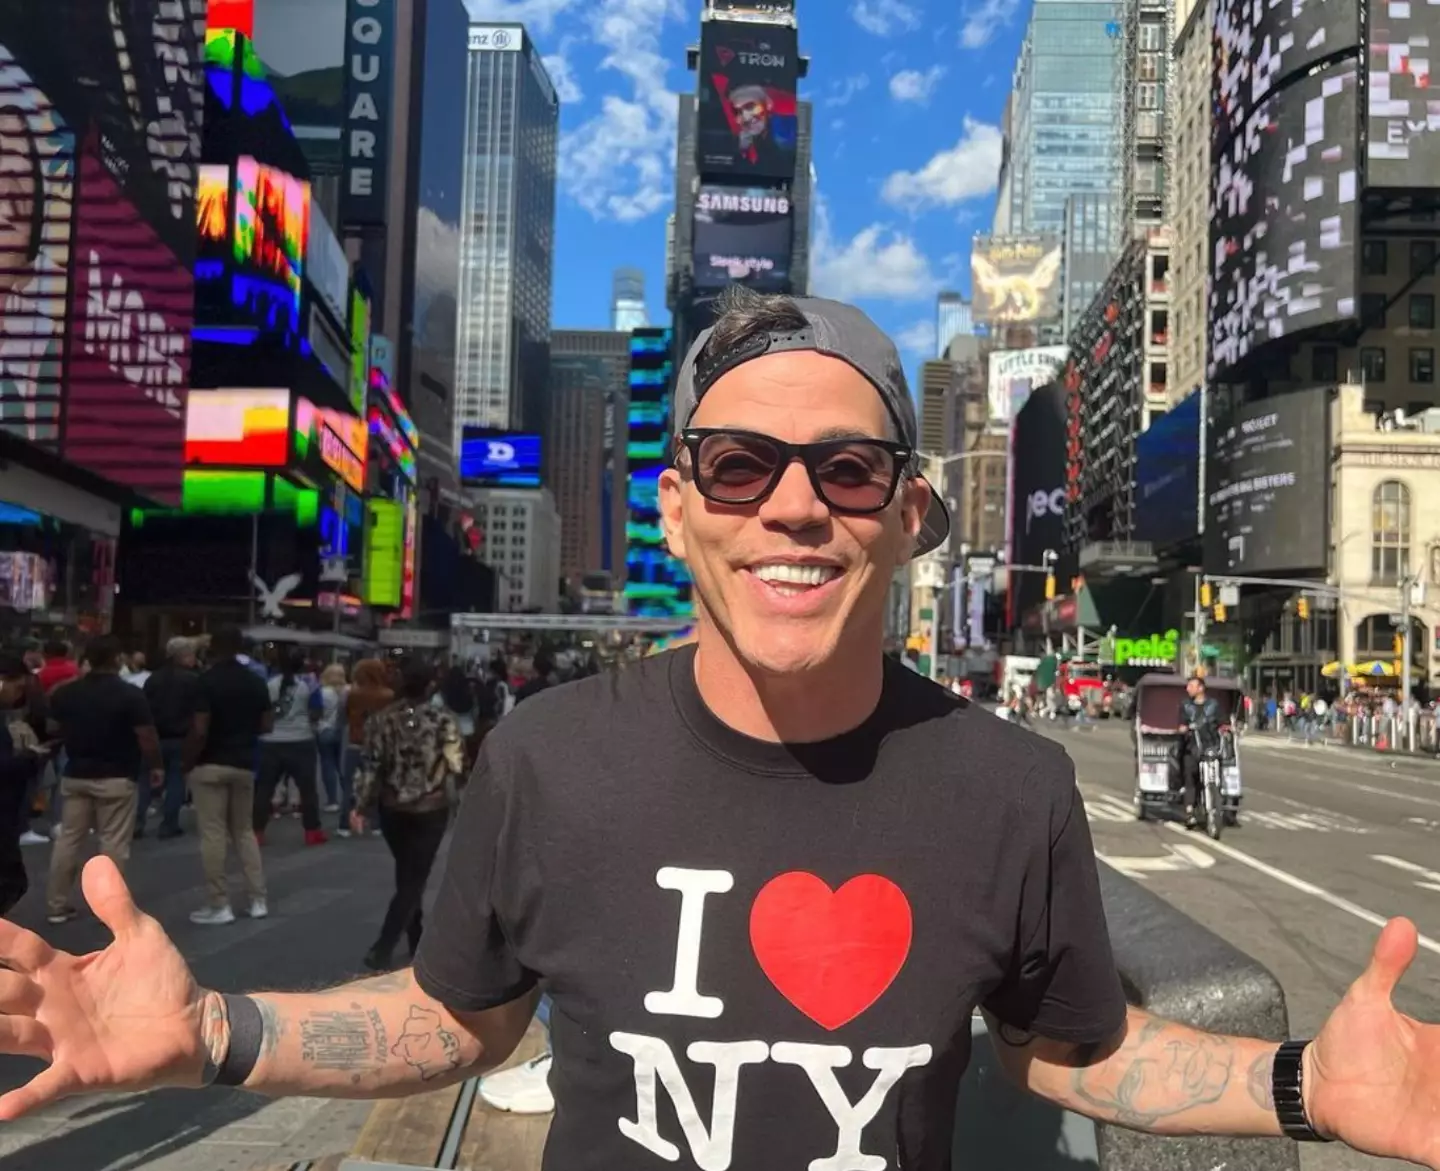 Steve-O spoke about why he had his favorite tattoo removed.